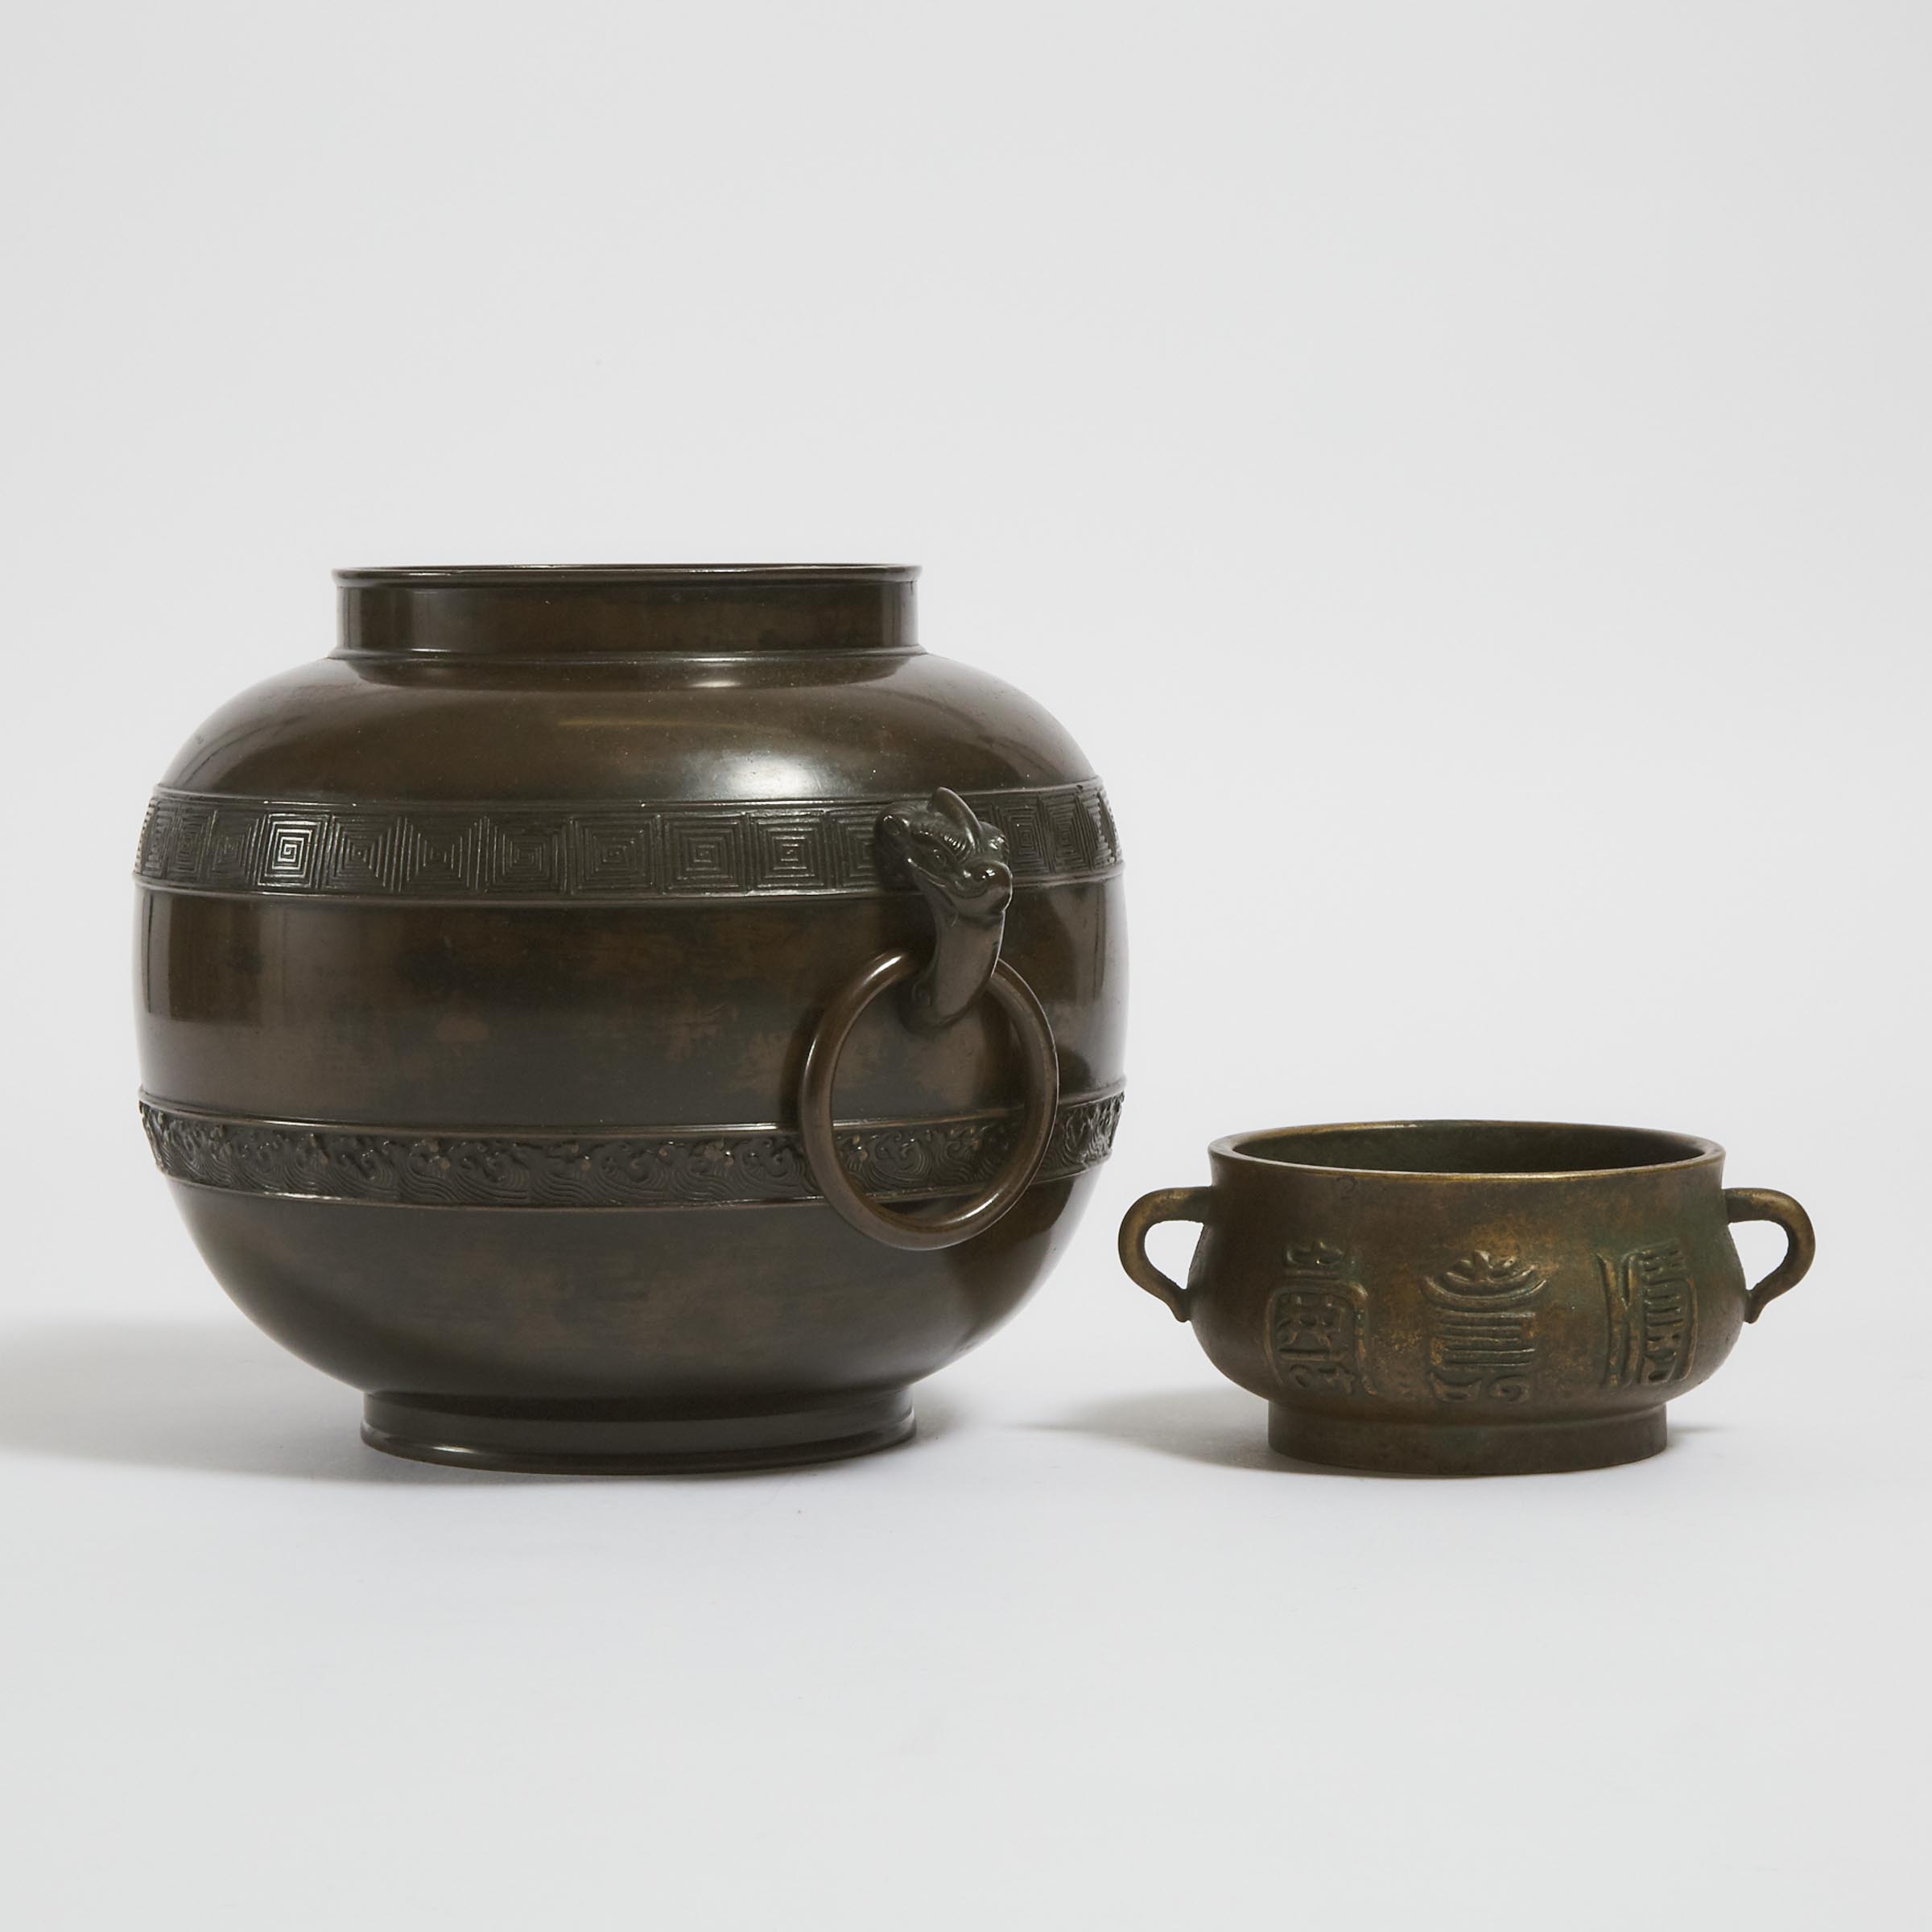 A Bronze Incense Burner, Yu Tang Qing Wan Mark, Together With a Bronze Vessel With Ring Handles